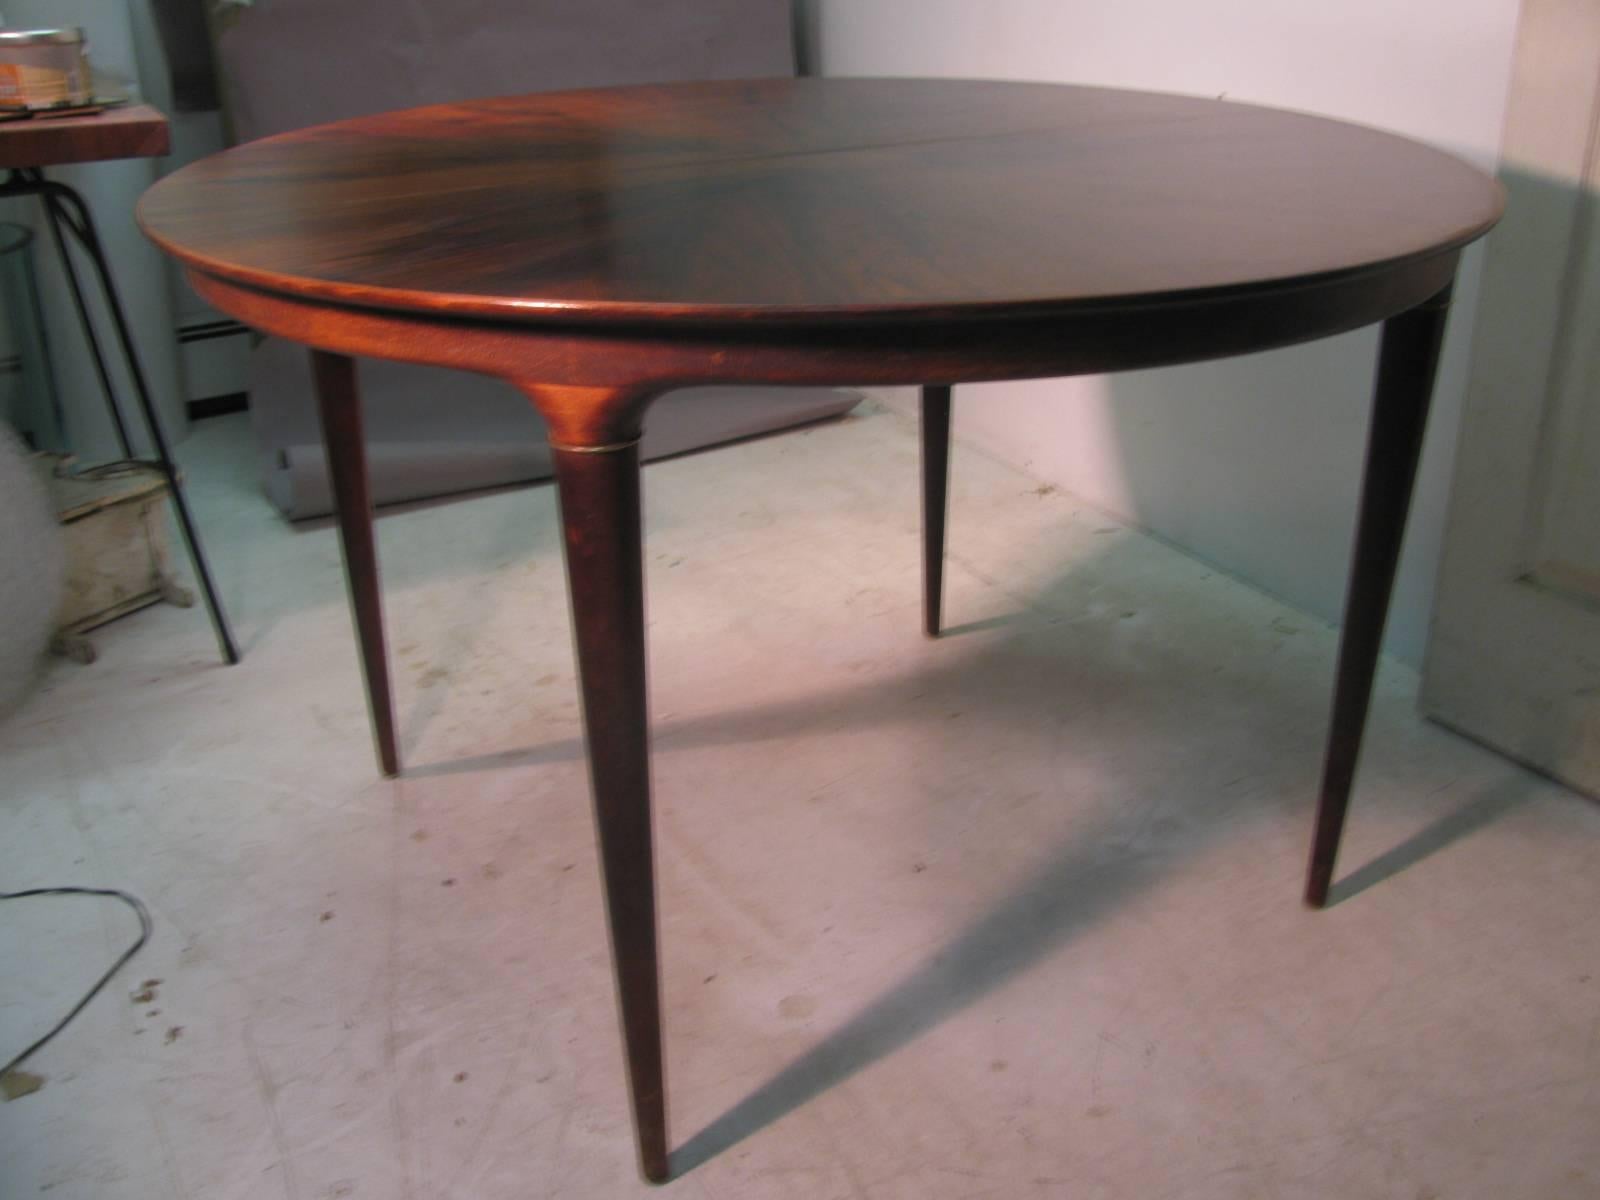 Scandinavian Modern Midcentury Scandanavian Modern Rosewood Dining Room Table with Two Leaves